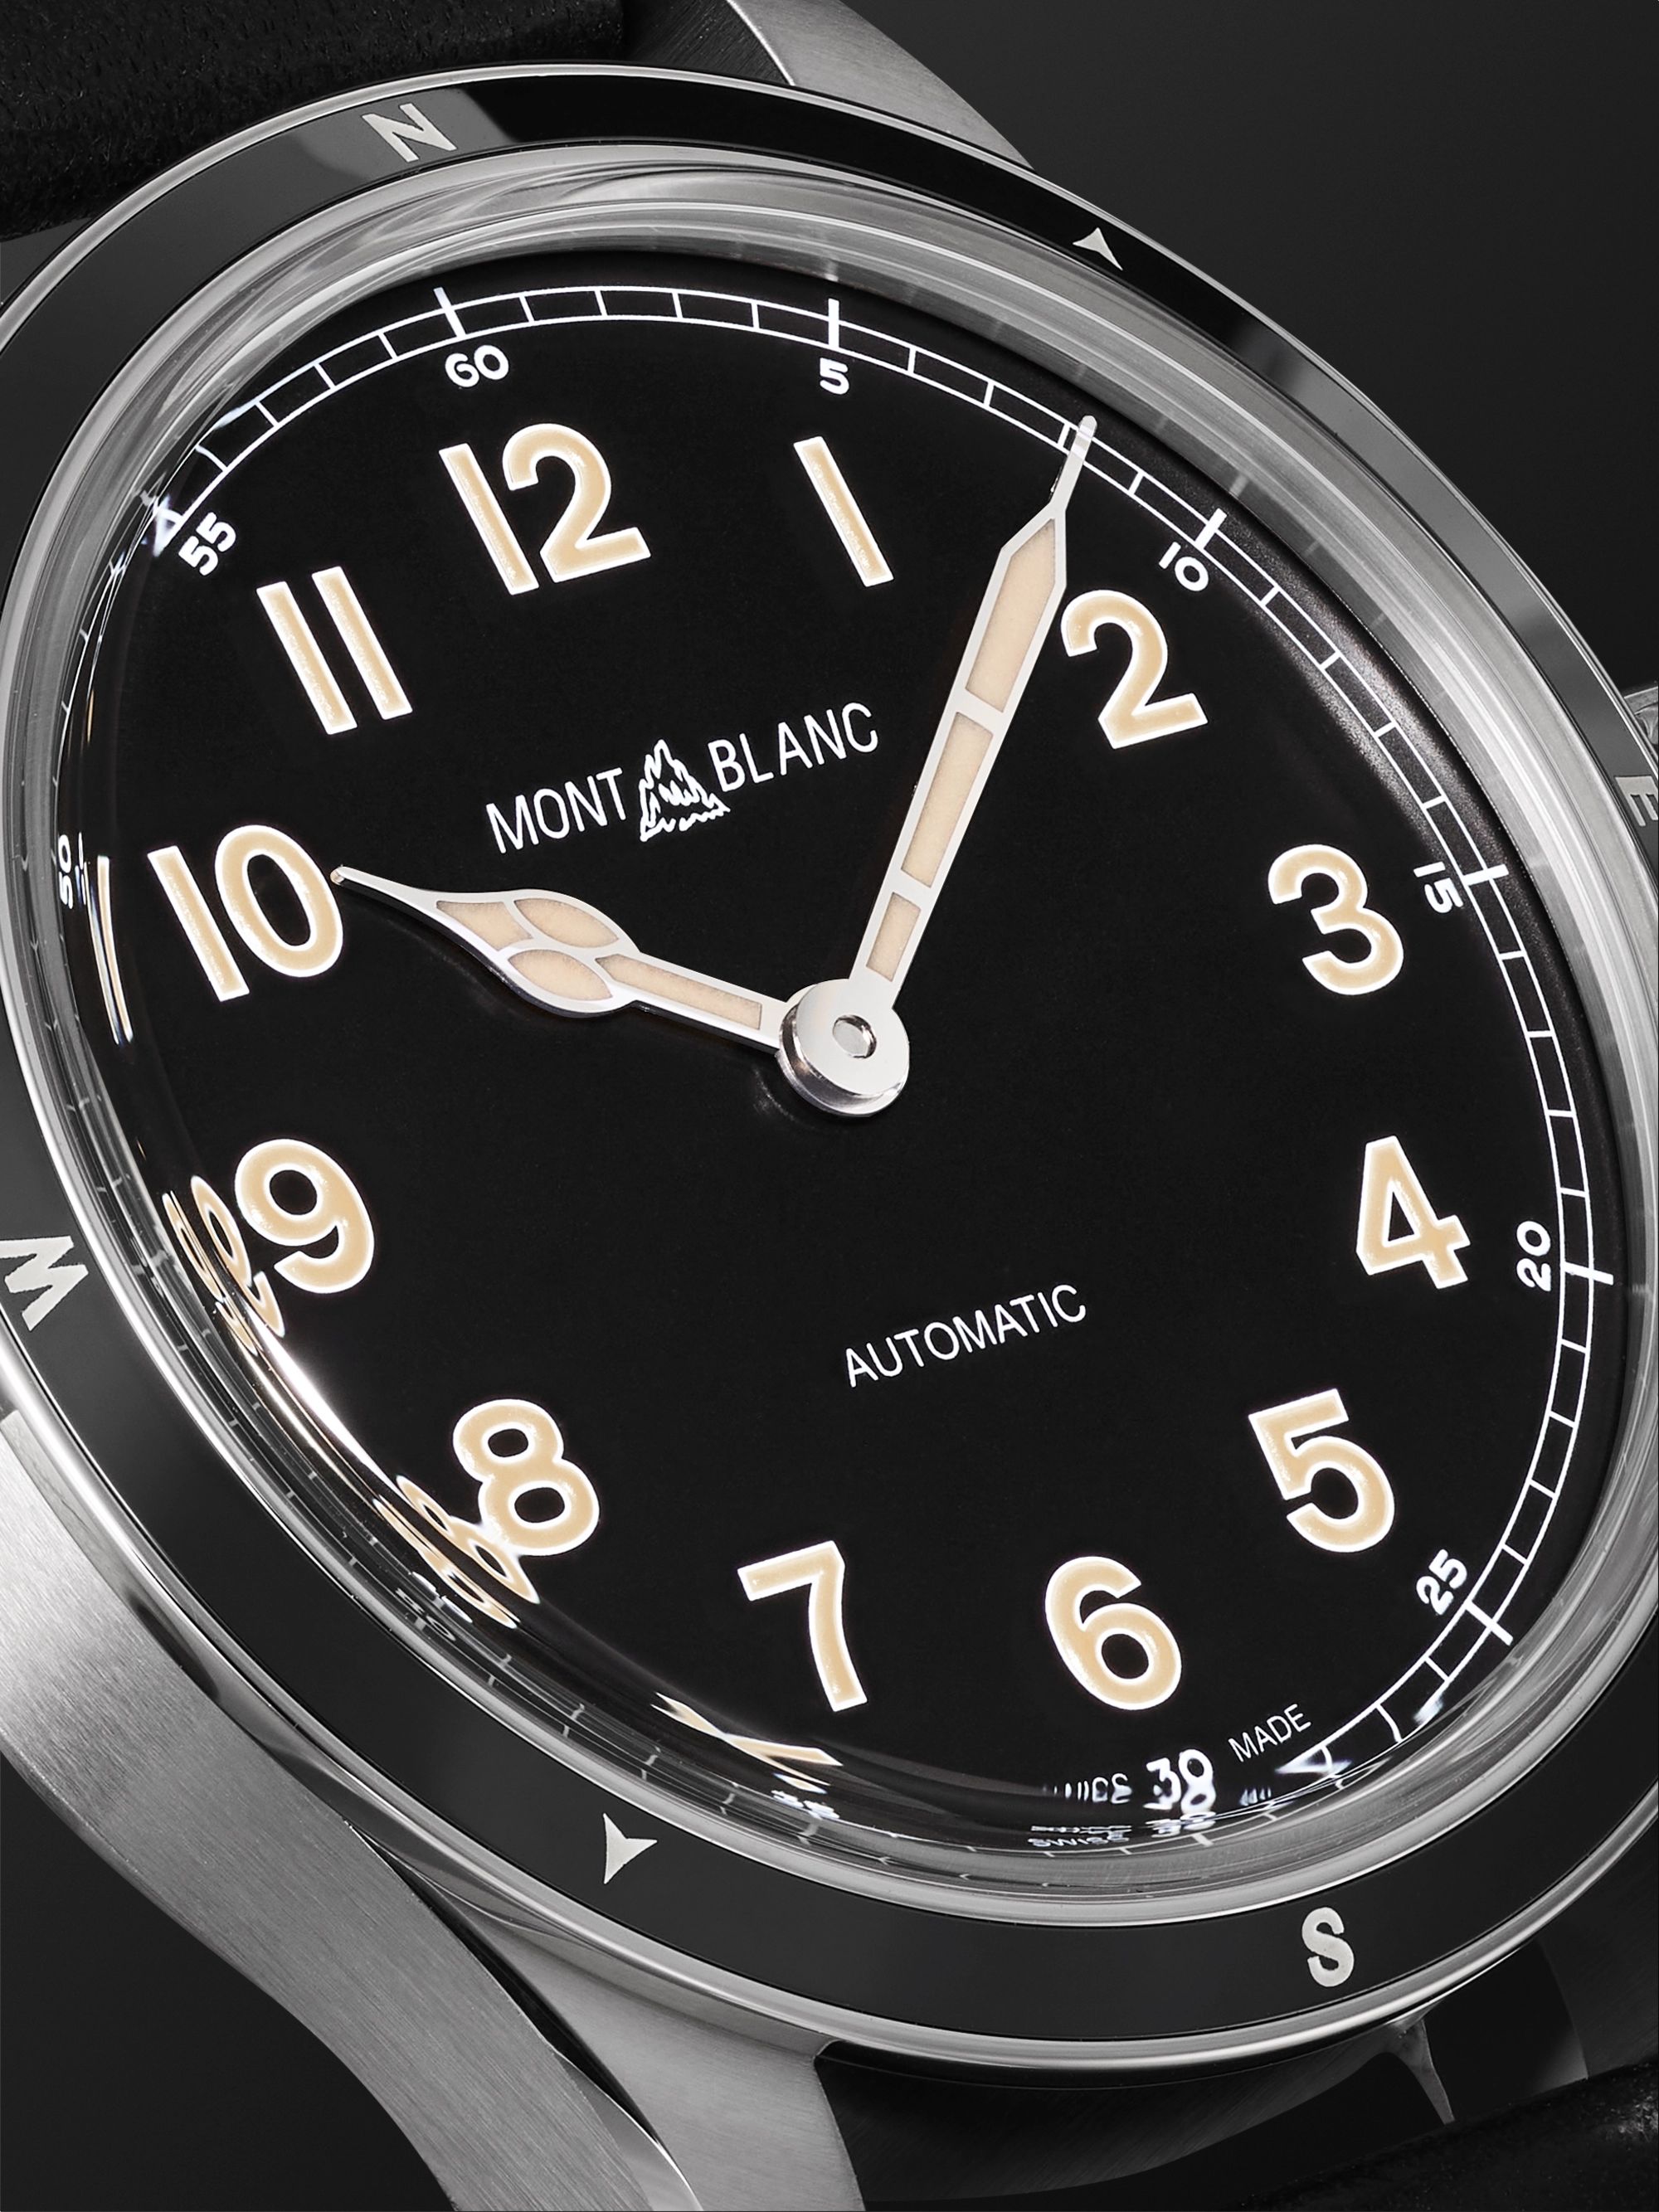 MONTBLANC 1858 Limited Edition Automatic 40mm Stainless Steel and Leather Watch, Ref. No. 126760